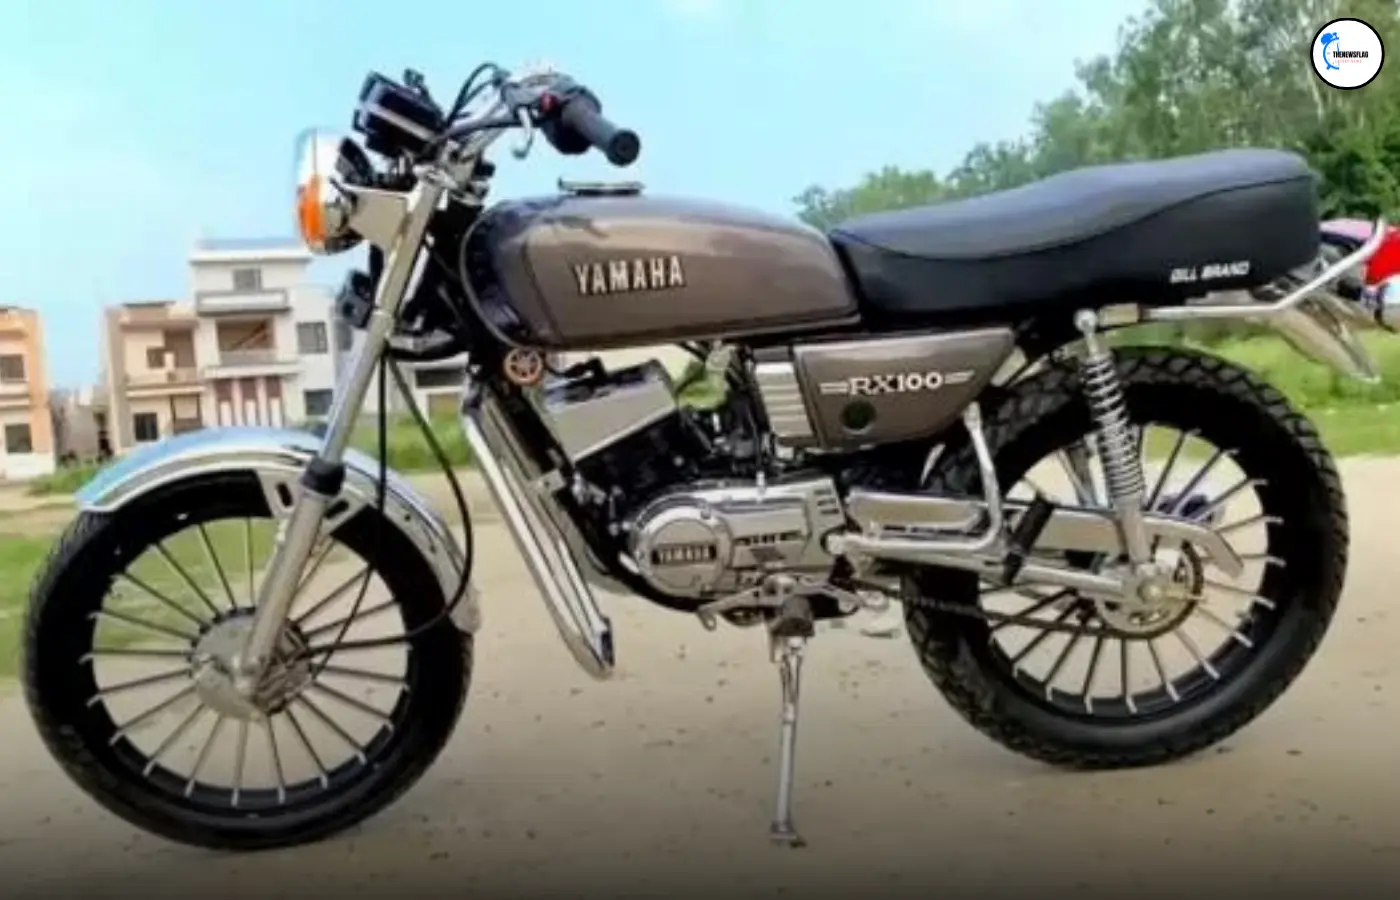 Yamaha RX100 launch date in India